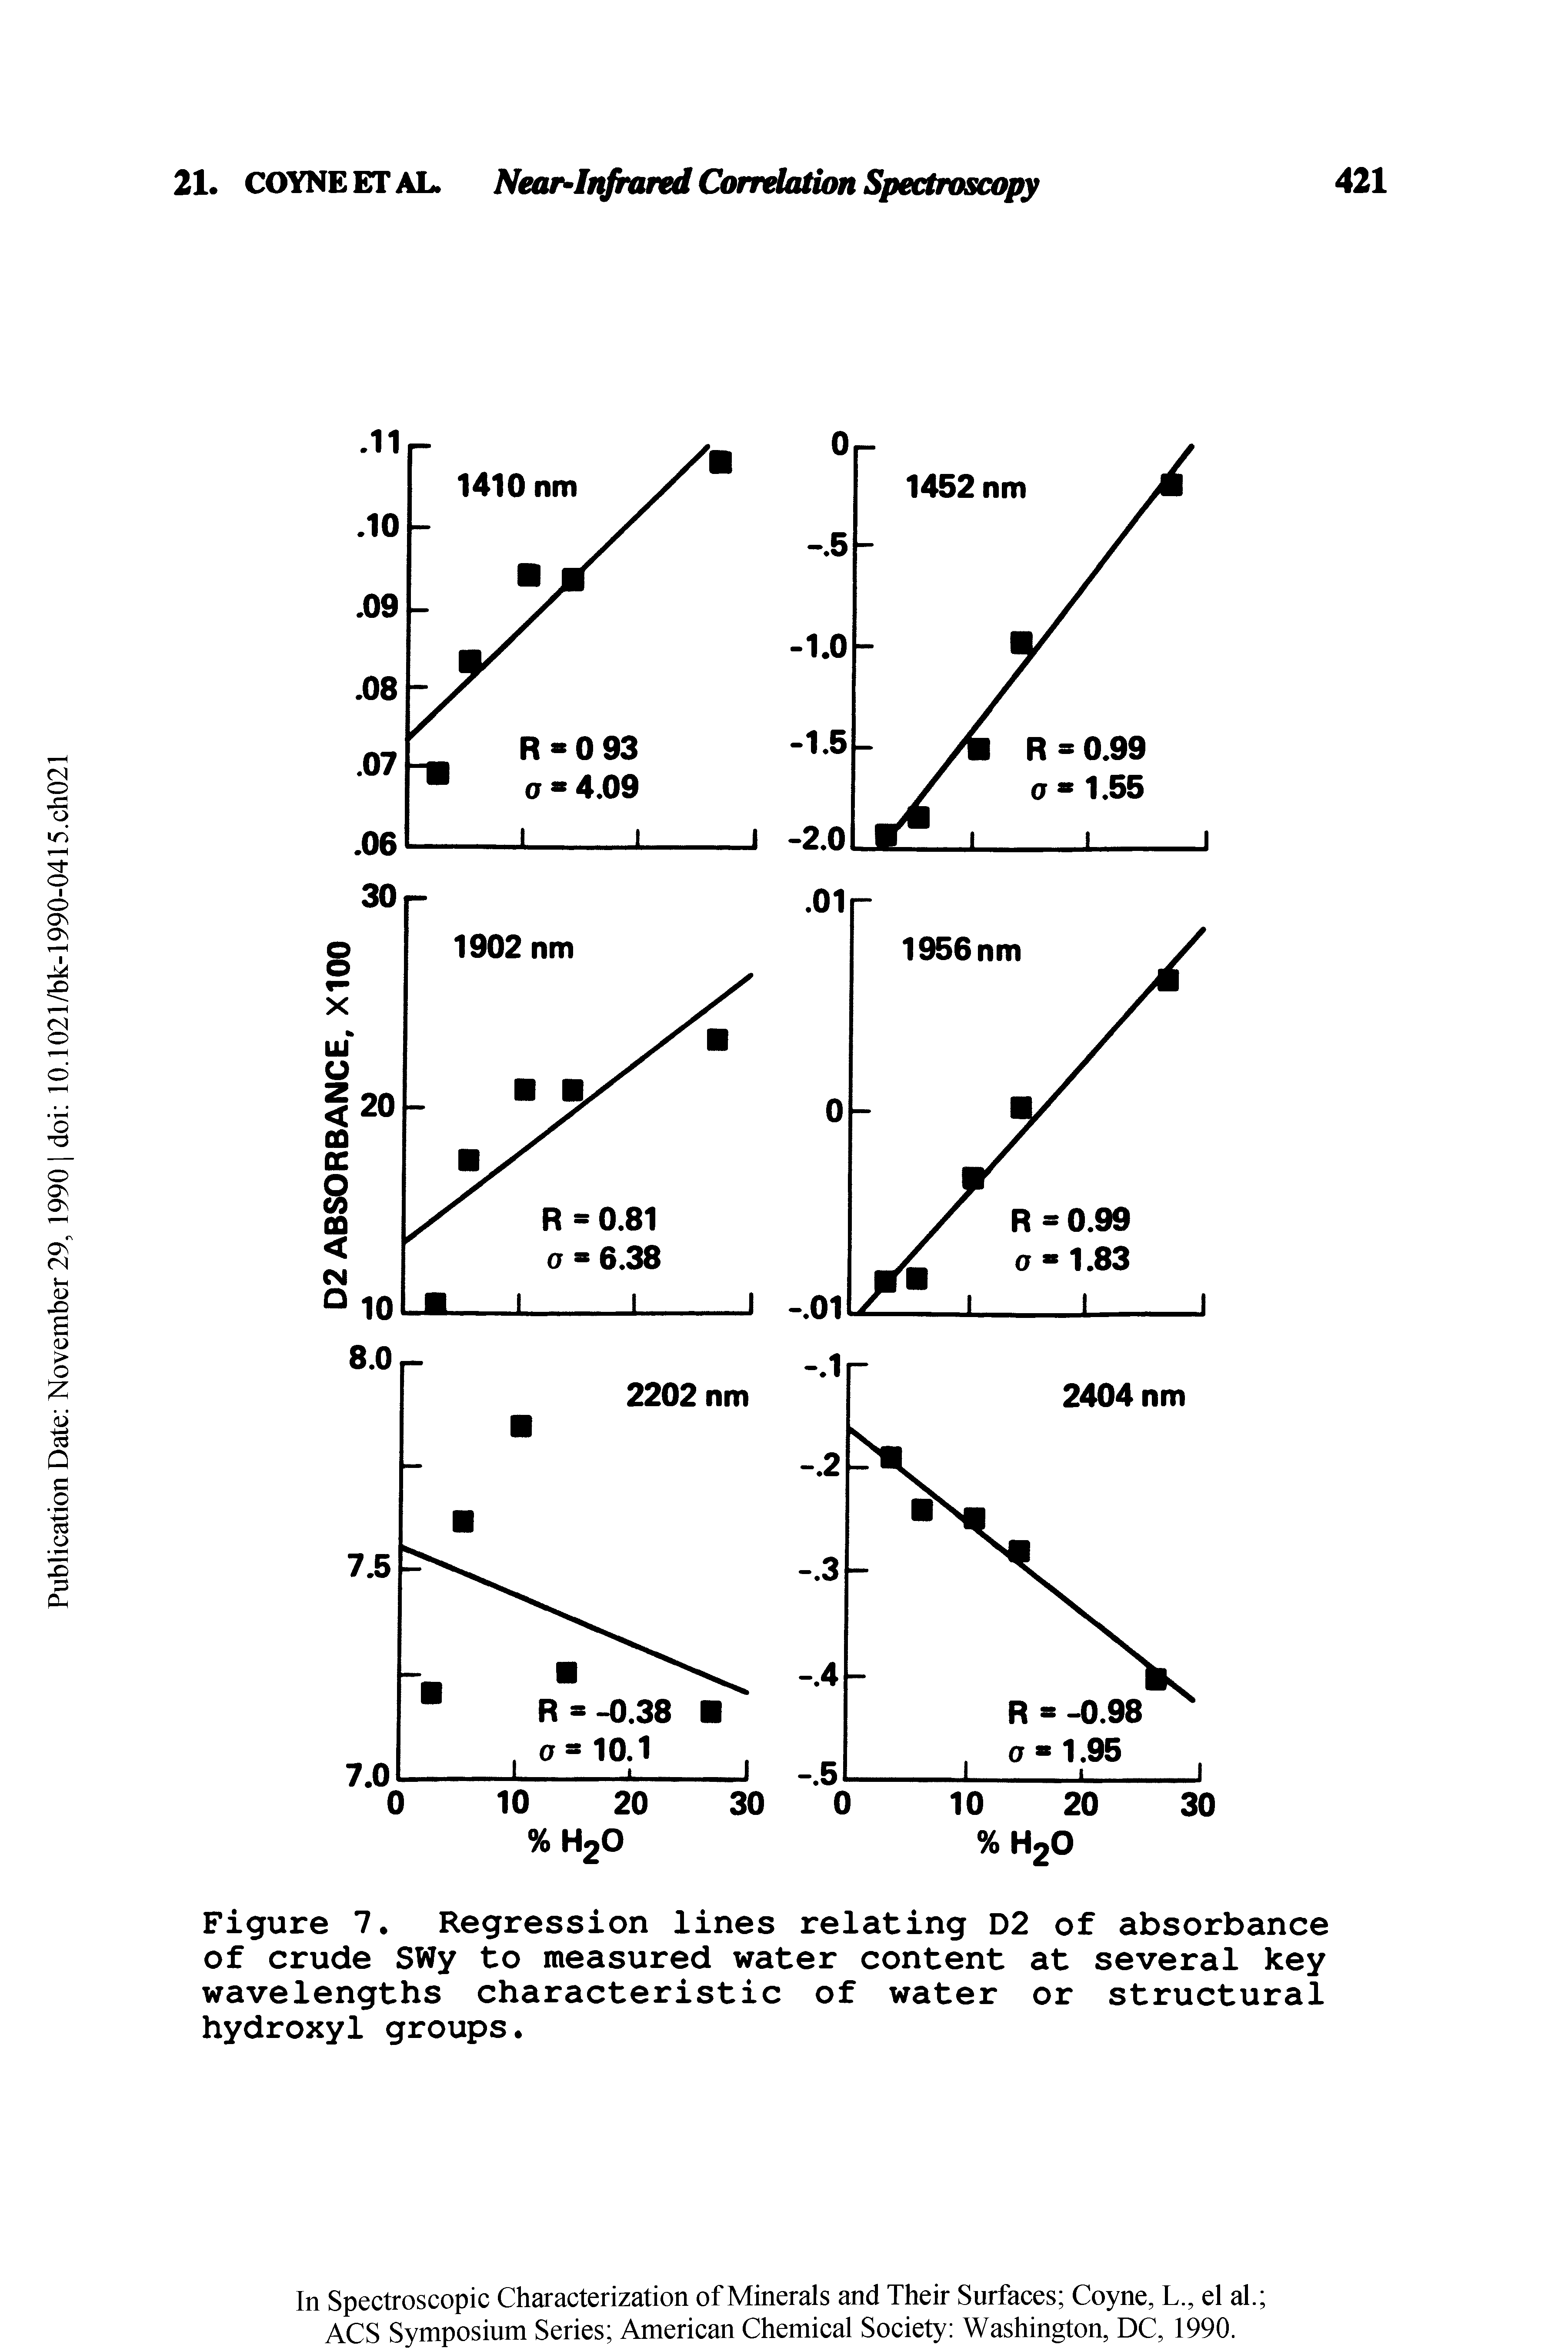 Figure 7. Regression lines relating D2 of absorbance of crude SWy to measured water content at several key wavelengths characteristic of water or structural hydroxyl groups.